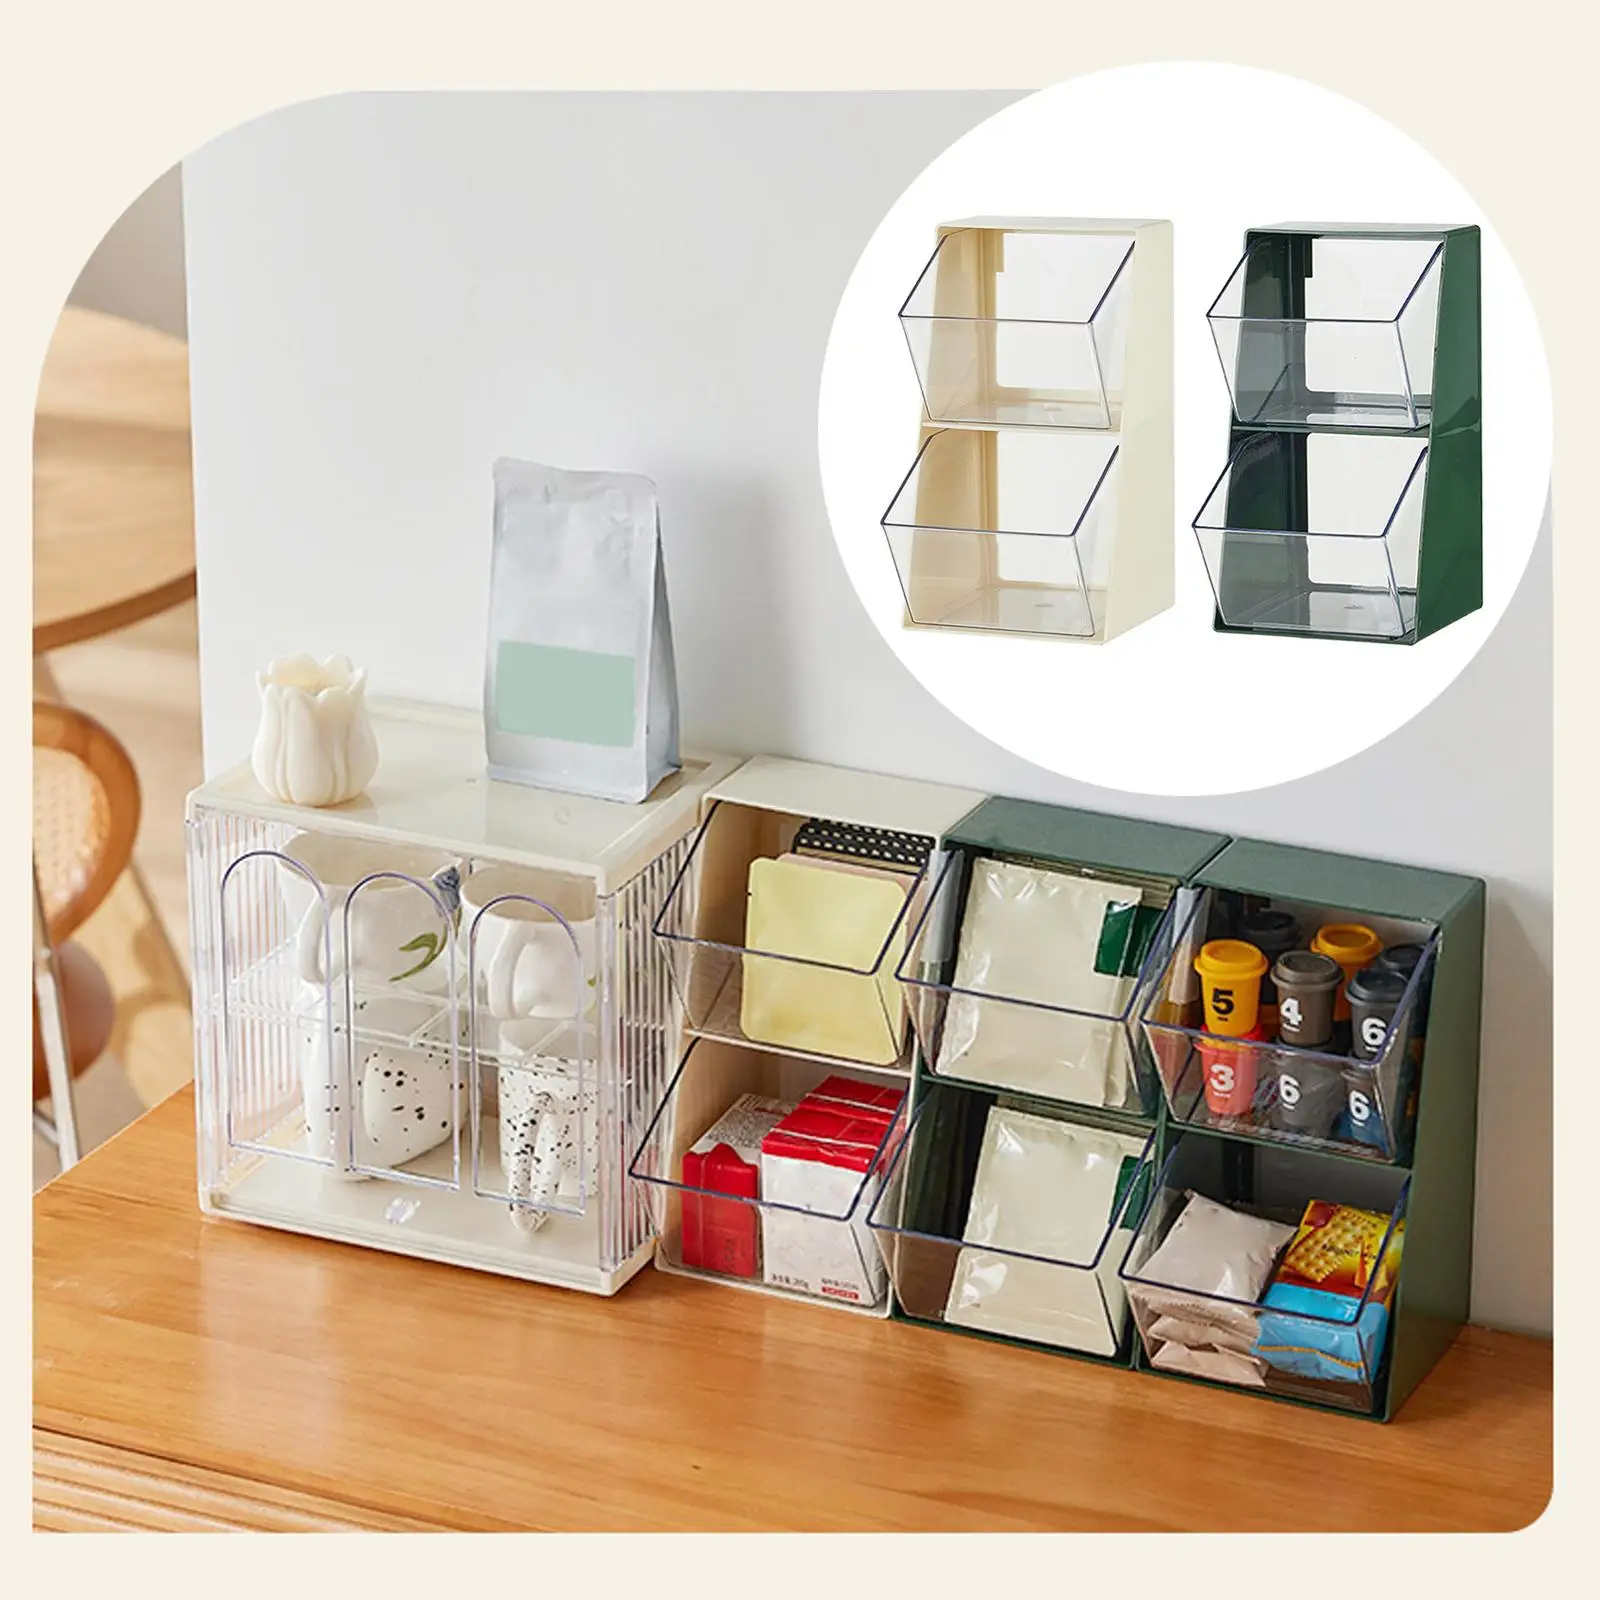 Tea Canister Containers,Handy Tea Box Organizer,Tea Storage for Pantry Cabinet